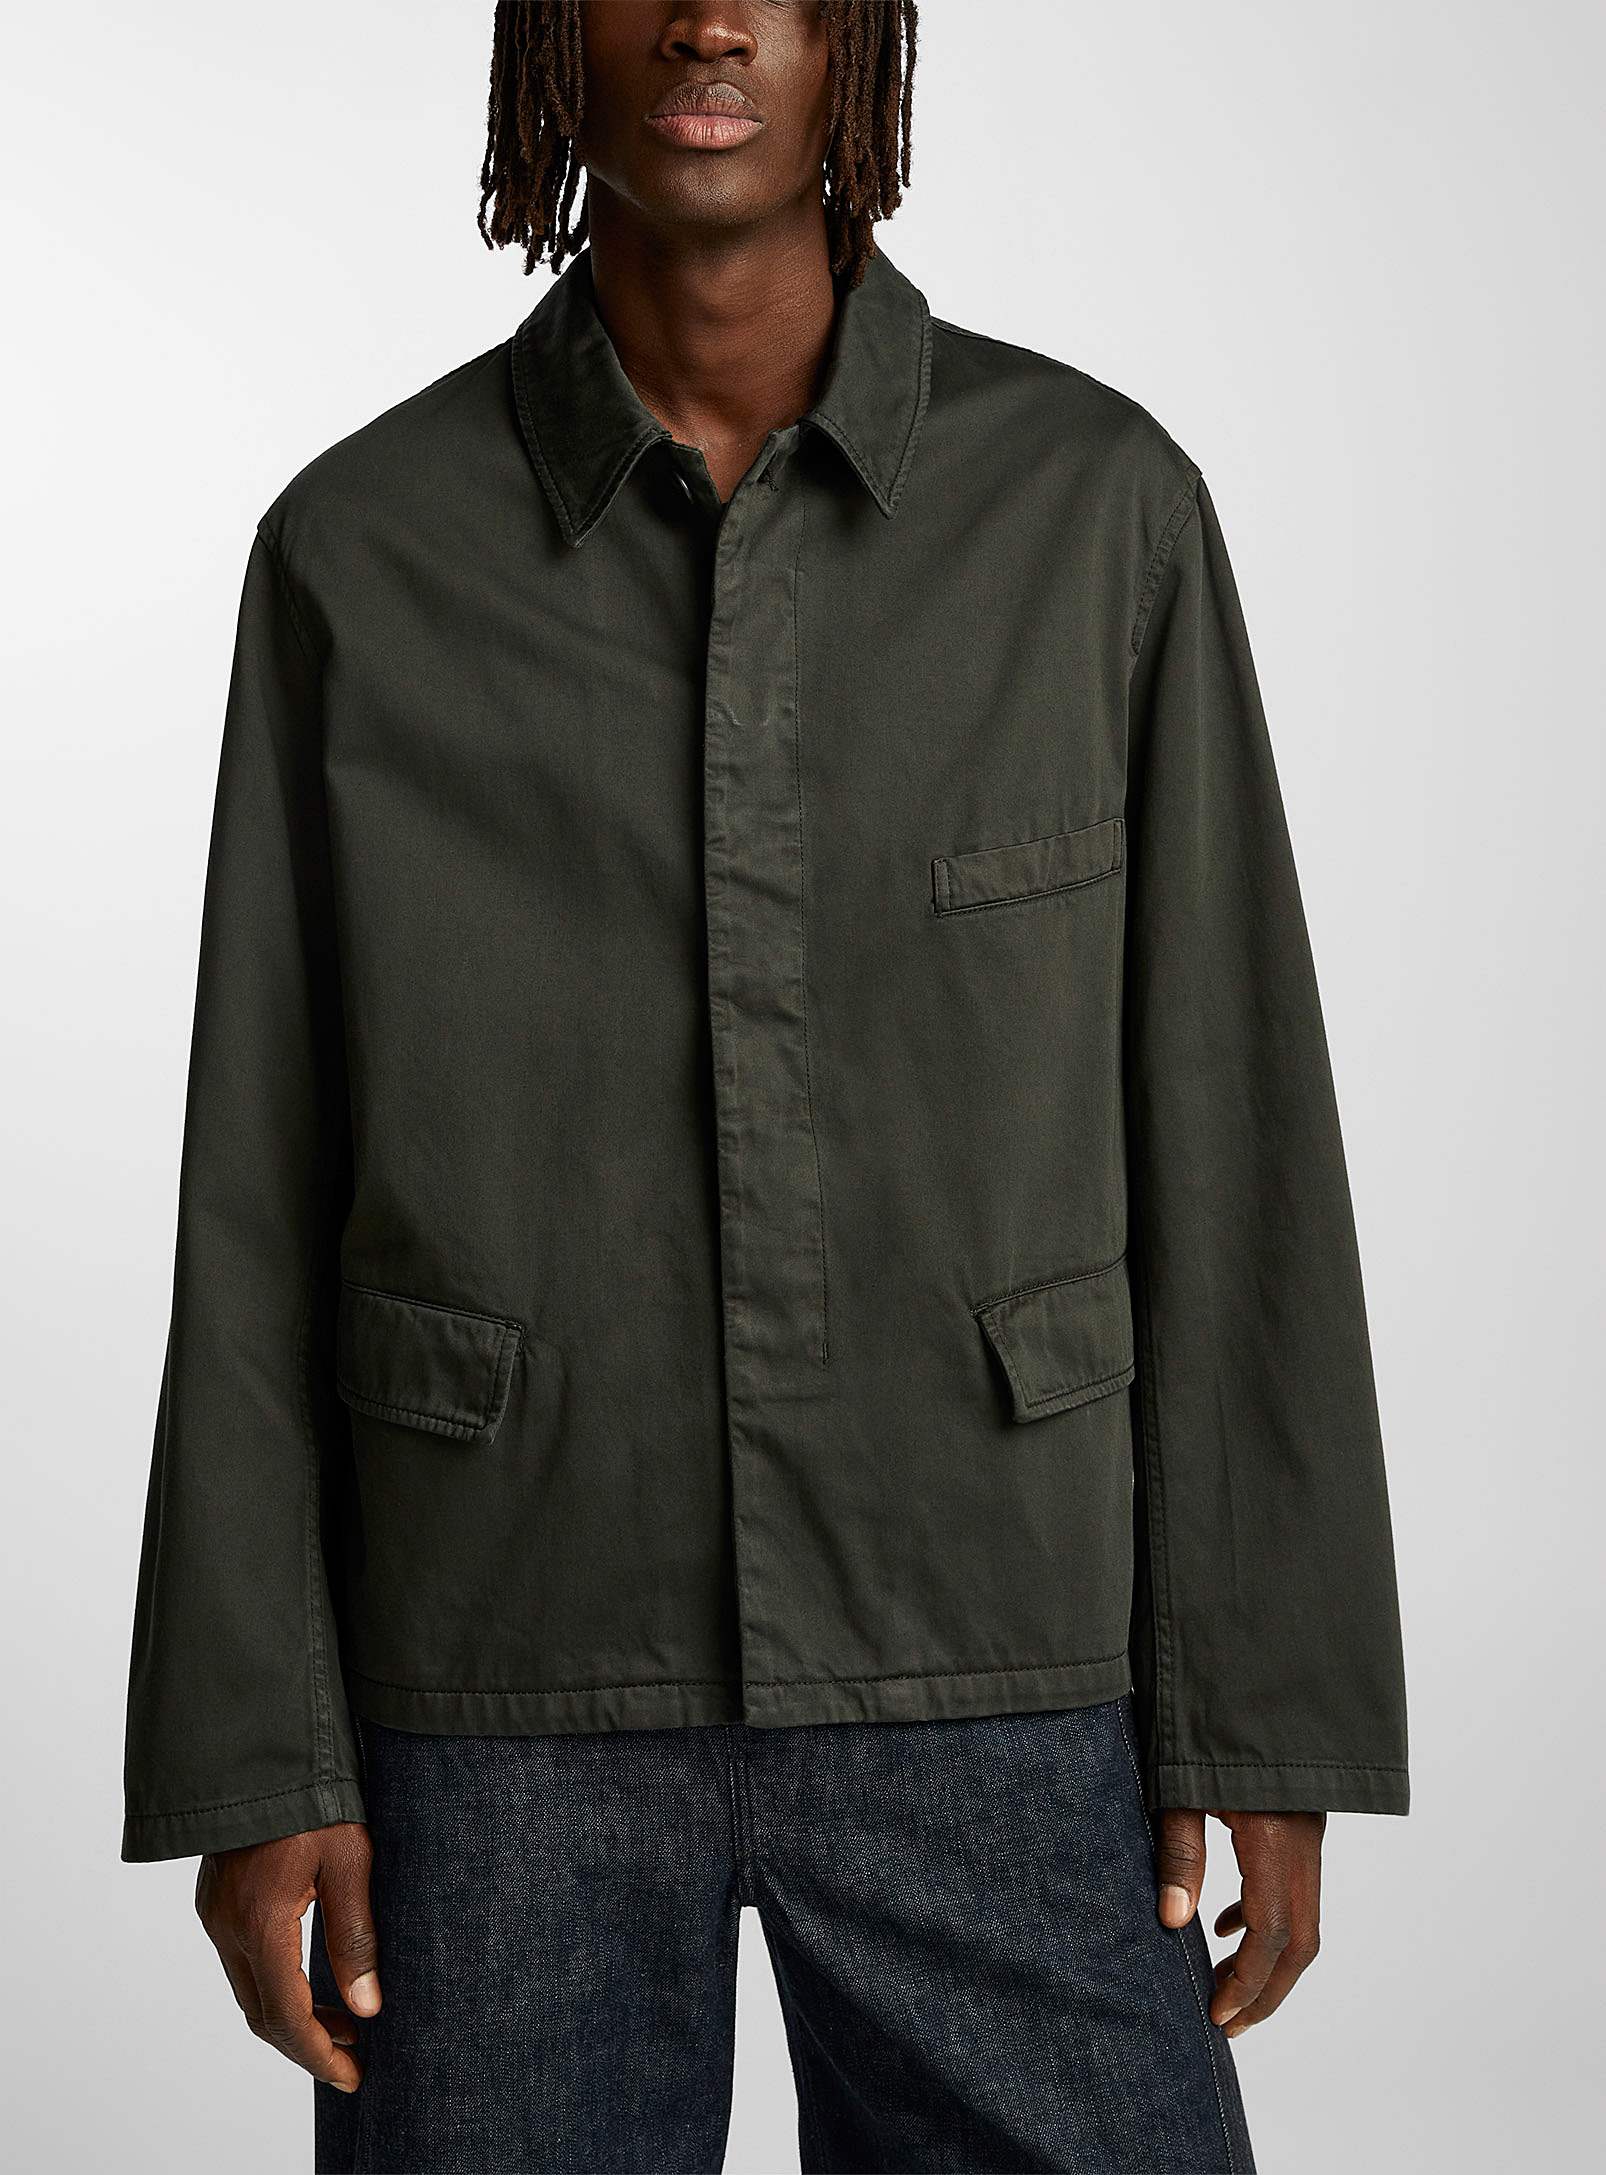 Lemaire - Men's Boxy-fit cotton twill jacket